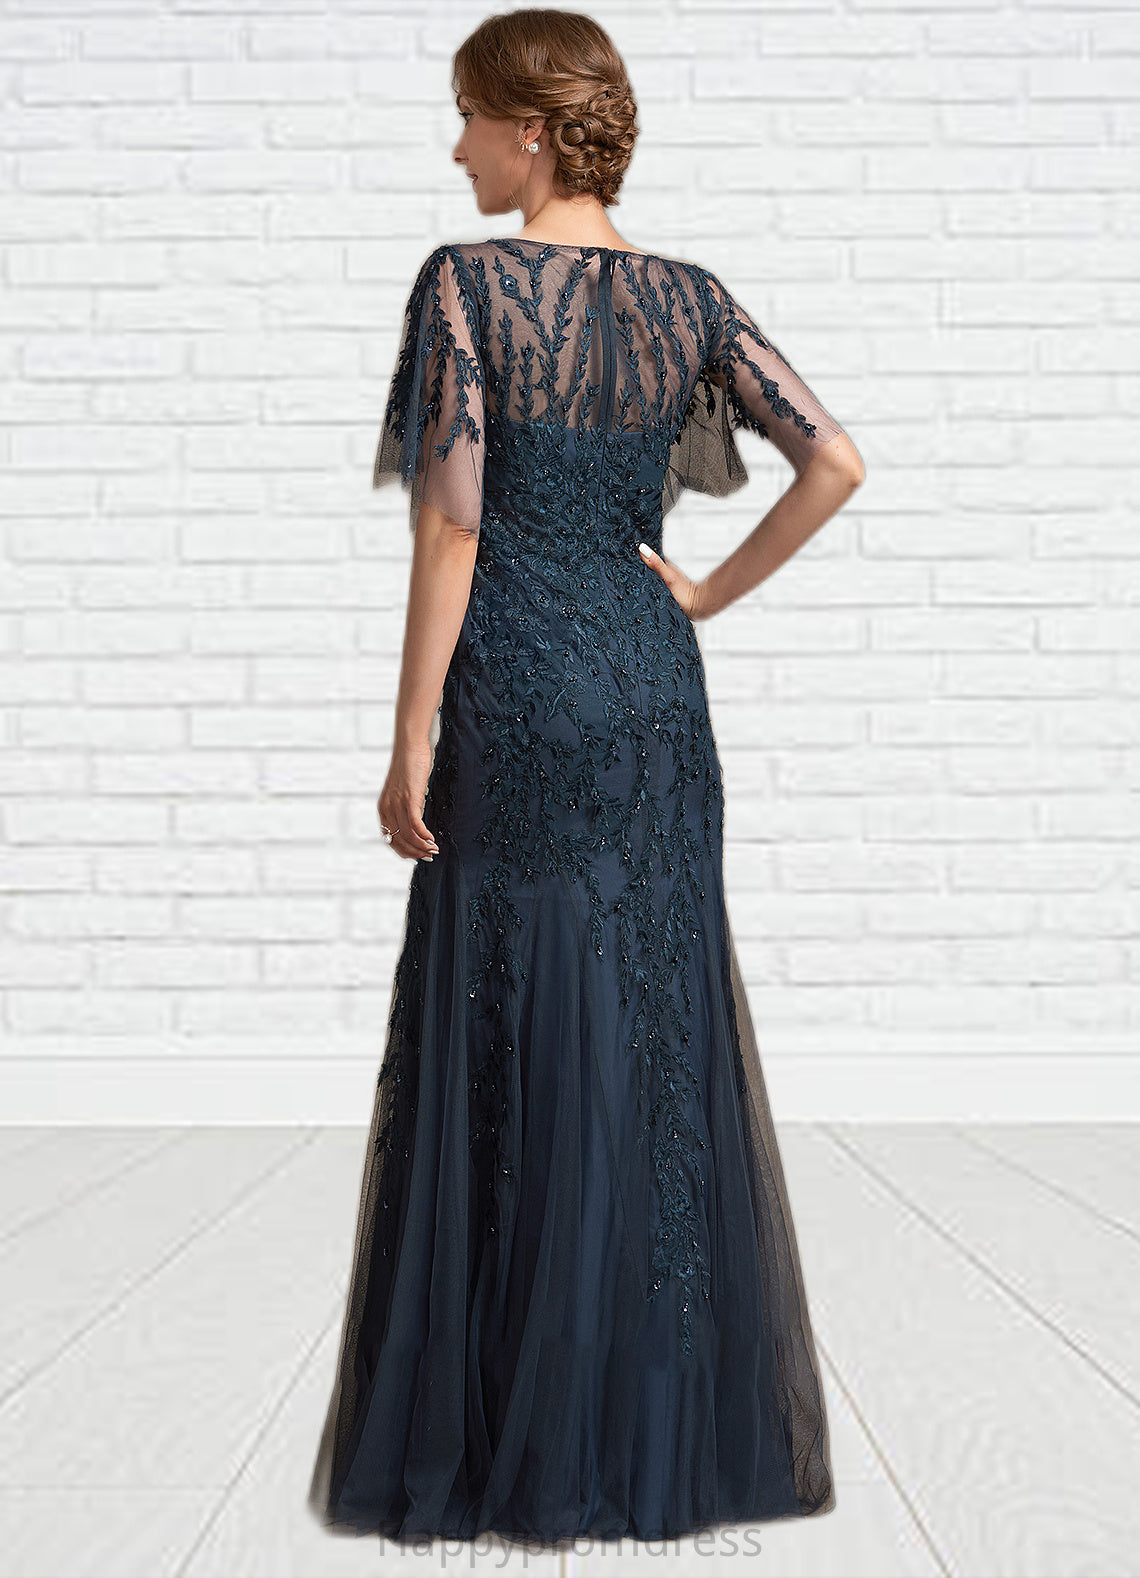 Nadia Trumpet/Mermaid Scoop Neck Floor-Length Tulle Lace Mother of the Bride Dress With Sequins XXS126P0014625